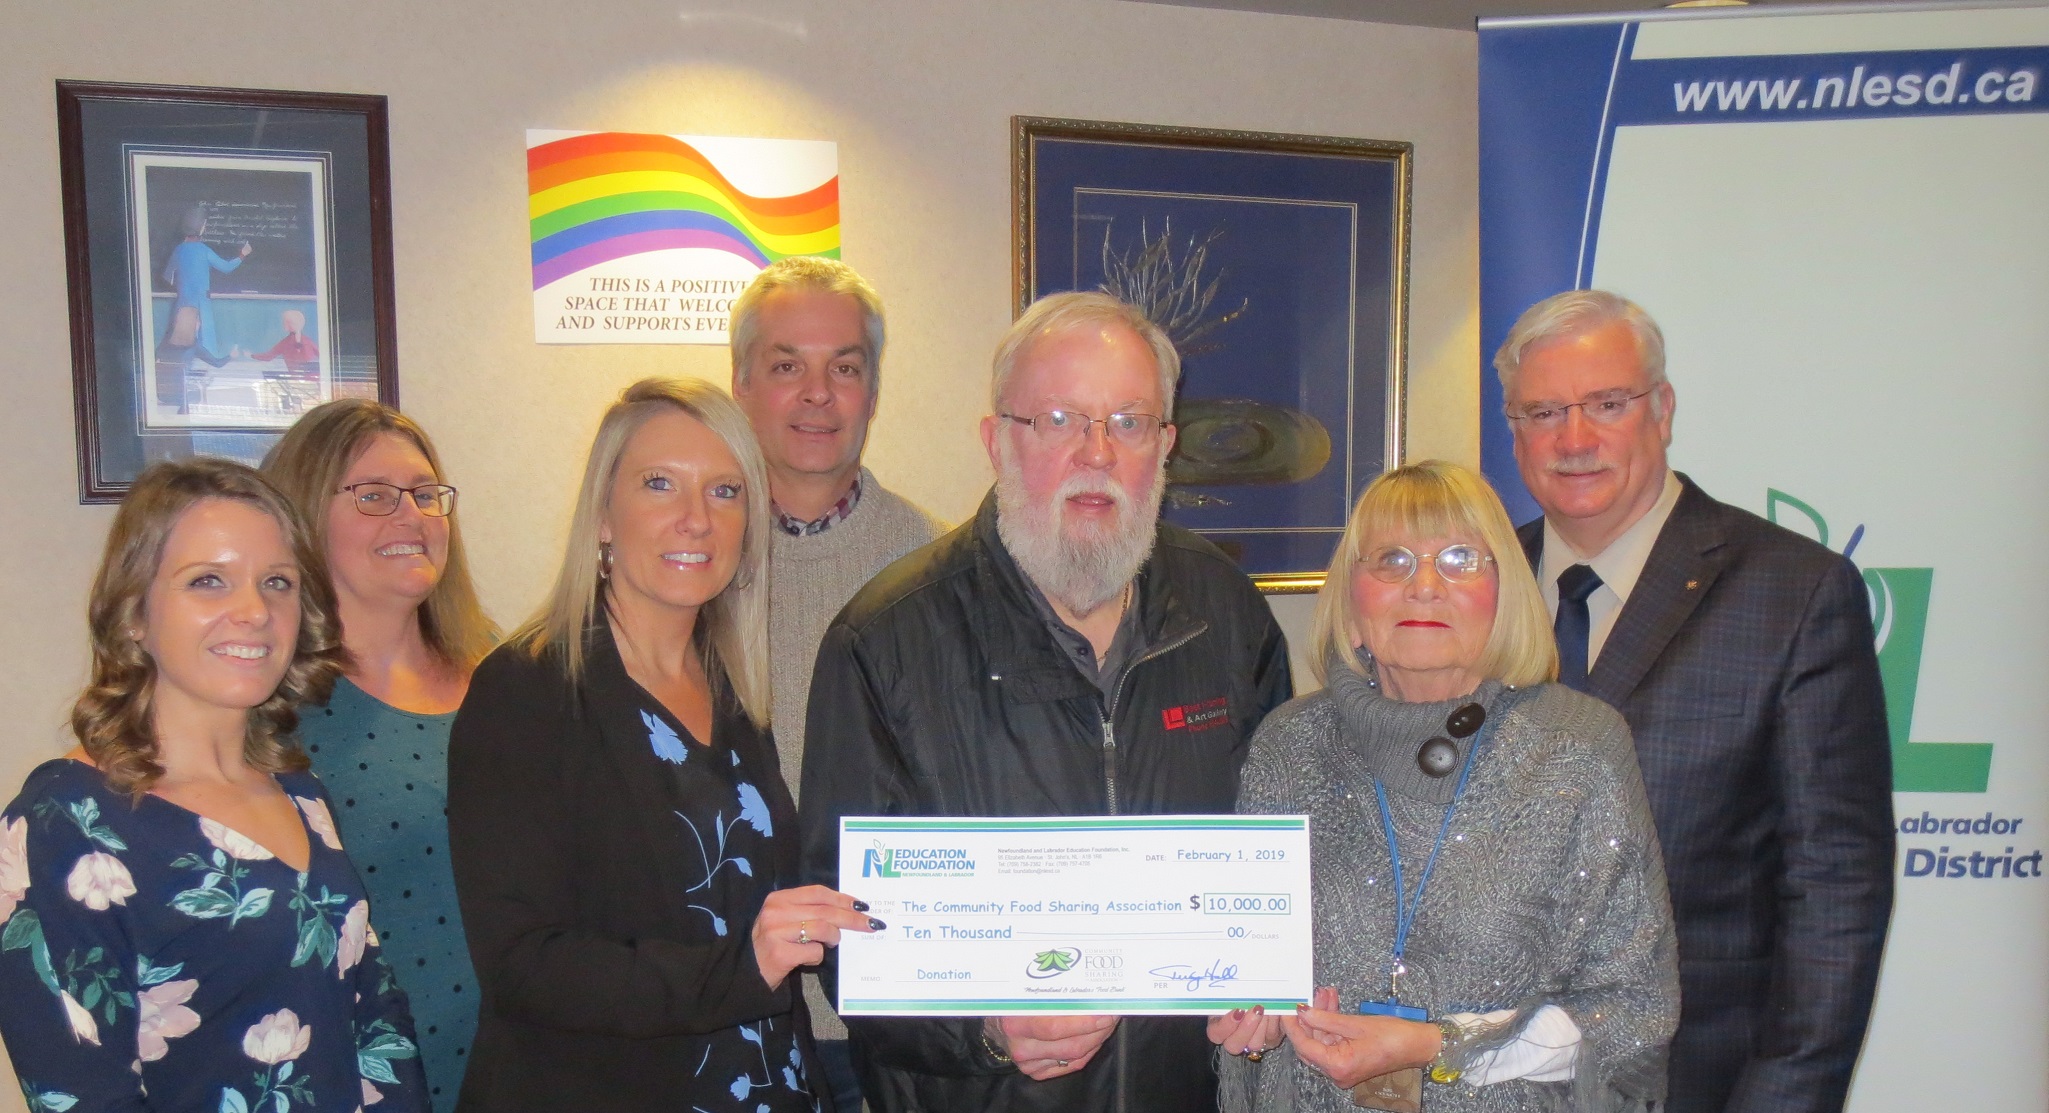 Staff representatives present the Community Food Sharing Association's Eg Walters with a cheque for $10,000 (photo credit: NLESD)